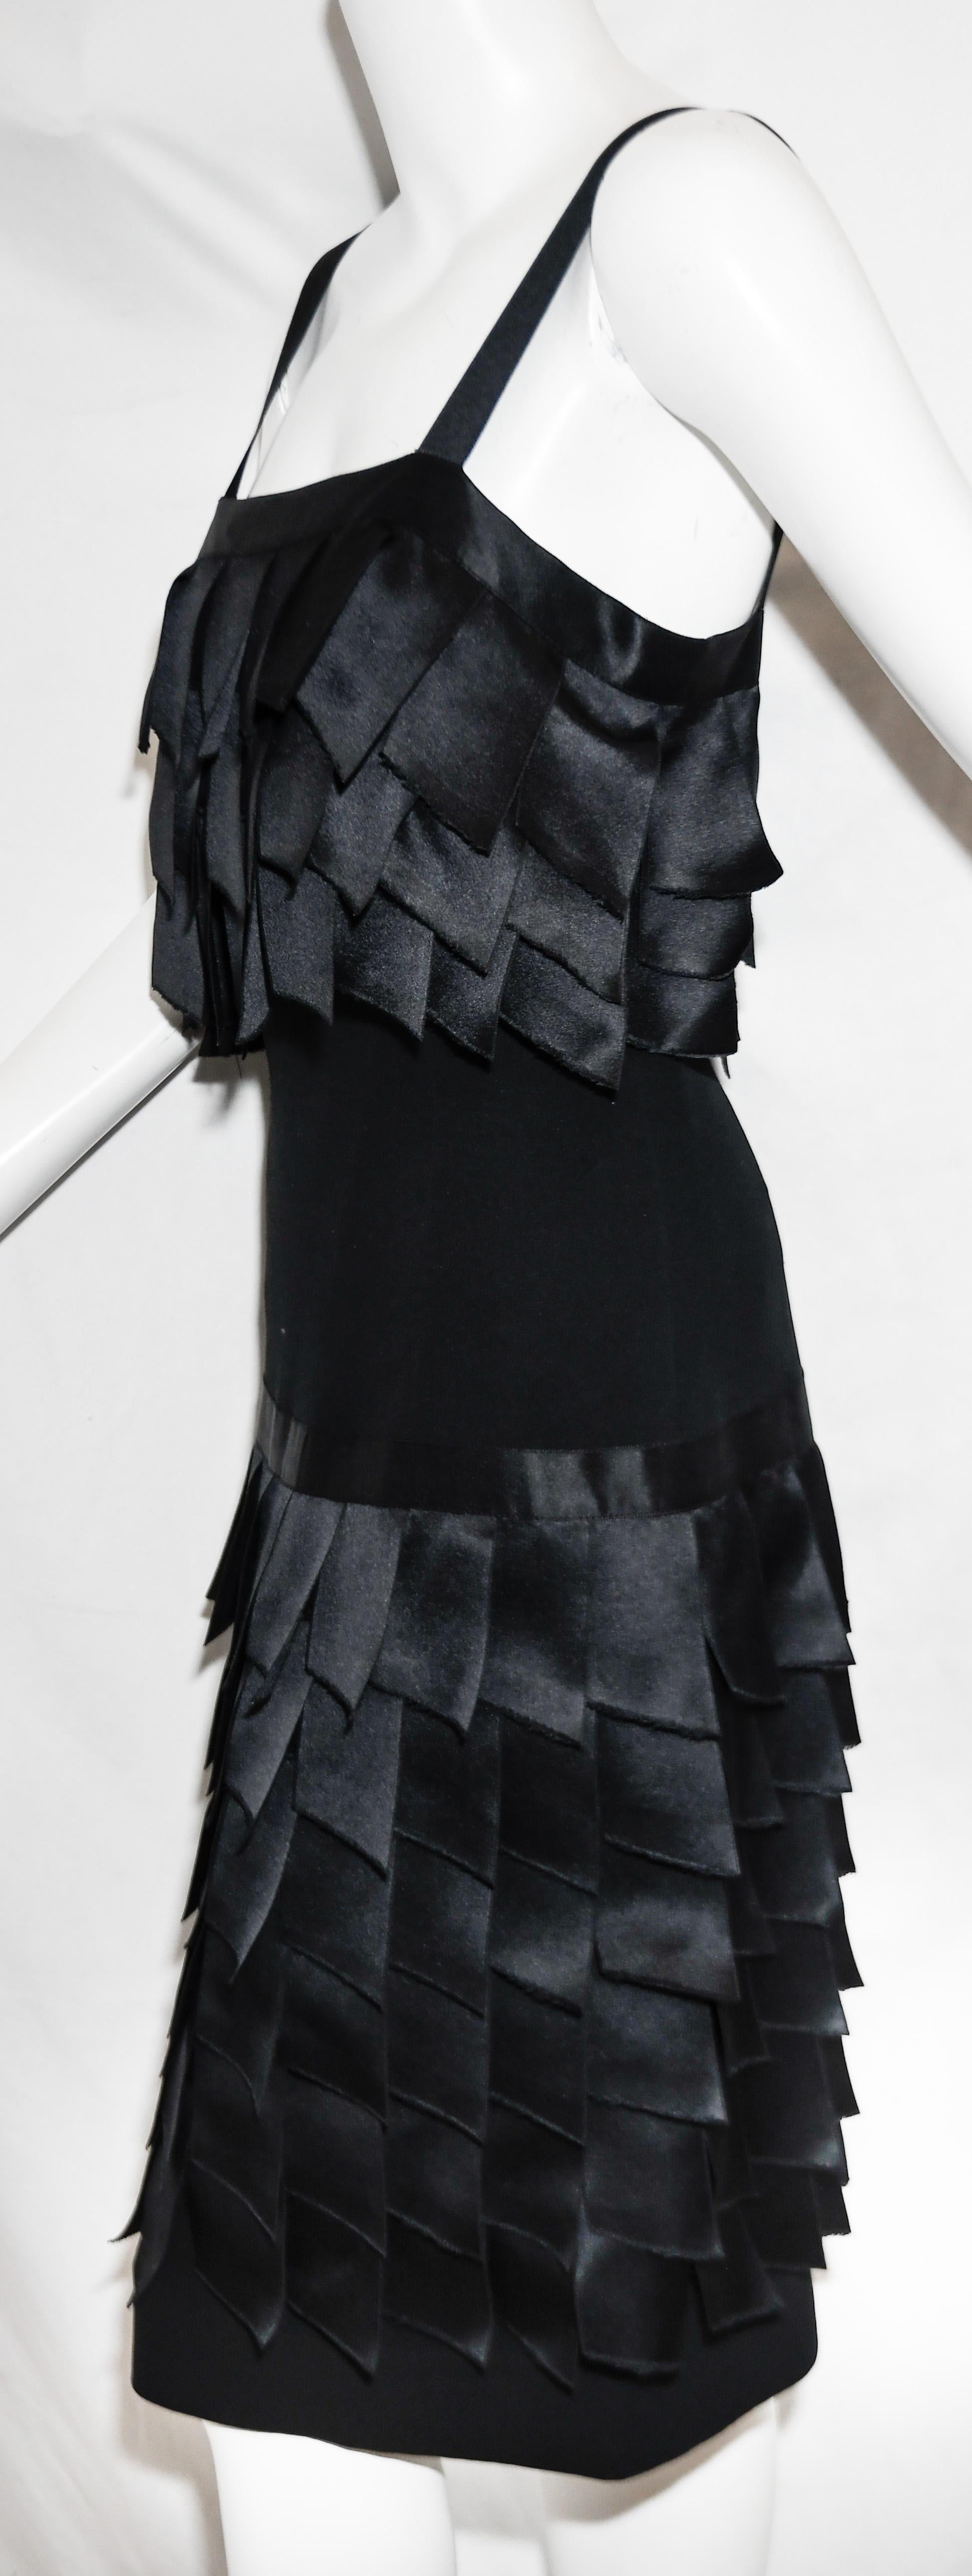 Chanel Boutique black crepe de chine silk 1990's dress is accentuated with black satin ribbon tabs that are frayed and layered creating a ruffle effect on the bodice and on the skirt of this dress.  Dress includes a mesh internal corset.  For